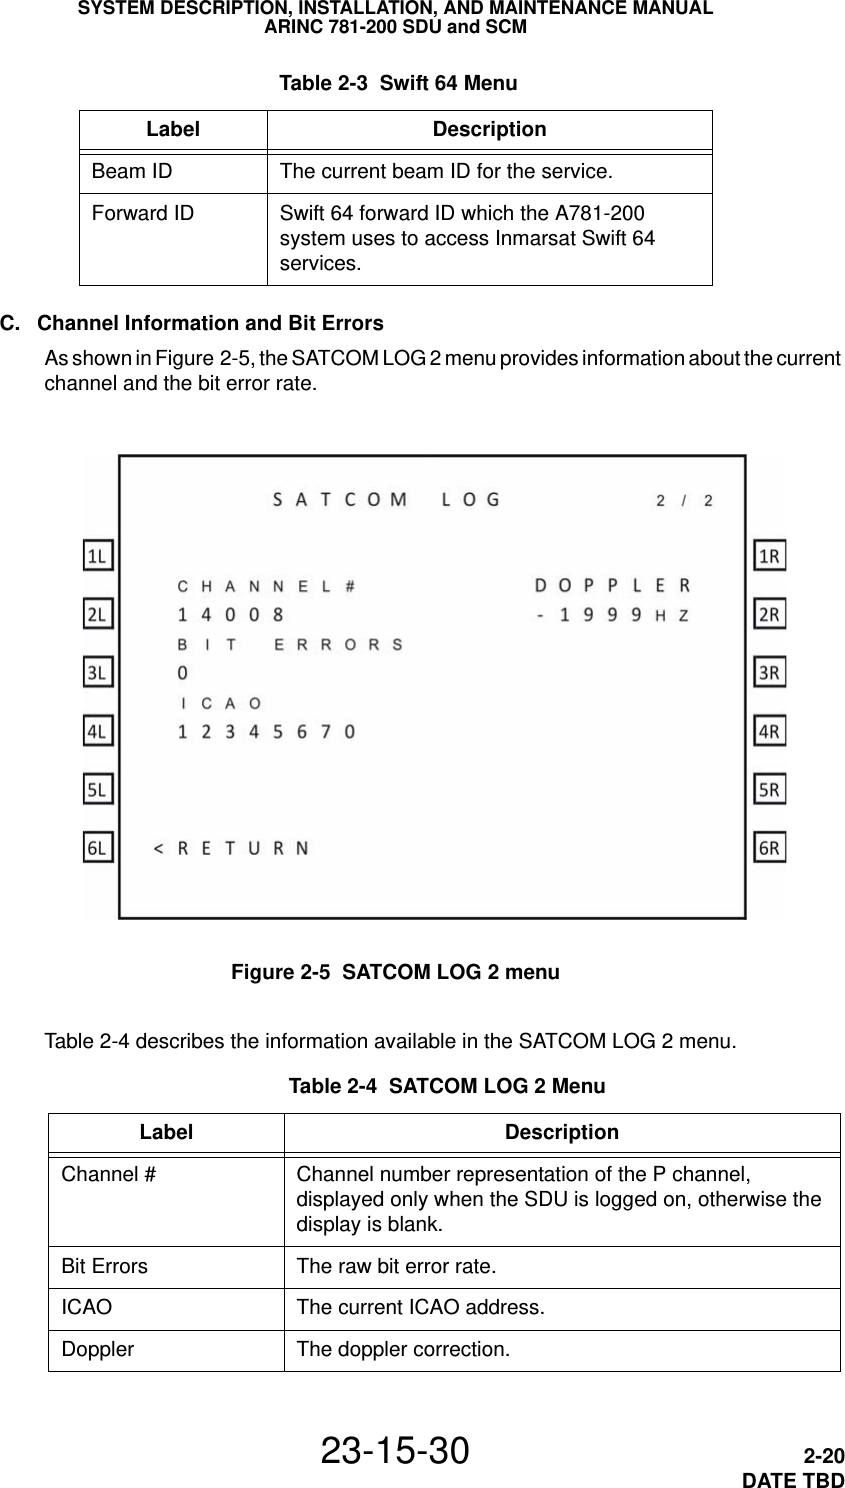 SYSTEM DESCRIPTION, INSTALLATION, AND MAINTENANCE MANUALARINC 781-200 SDU and SCM23-15-30 2-20DATE TBDC. Channel Information and Bit ErrorsAs shown in Figure 2-5, the SATCOM LOG 2 menu provides information about the current channel and the bit error rate.Figure 2-5  SATCOM LOG 2 menu Table 2-4  SATCOM LOG 2 MenuLabel DescriptionChannel # Channel number representation of the P channel, displayed only when the SDU is logged on, otherwise the display is blank.Bit Errors The raw bit error rate.ICAO The current ICAO address.Doppler The doppler correction.Table 2-4 describes the information available in the SATCOM LOG 2 menu.Beam ID The current beam ID for the service.Forward ID Swift 64 forward ID which the A781-200 system uses to access Inmarsat Swift 64 services. Table 2-3  Swift 64 MenuLabel Description